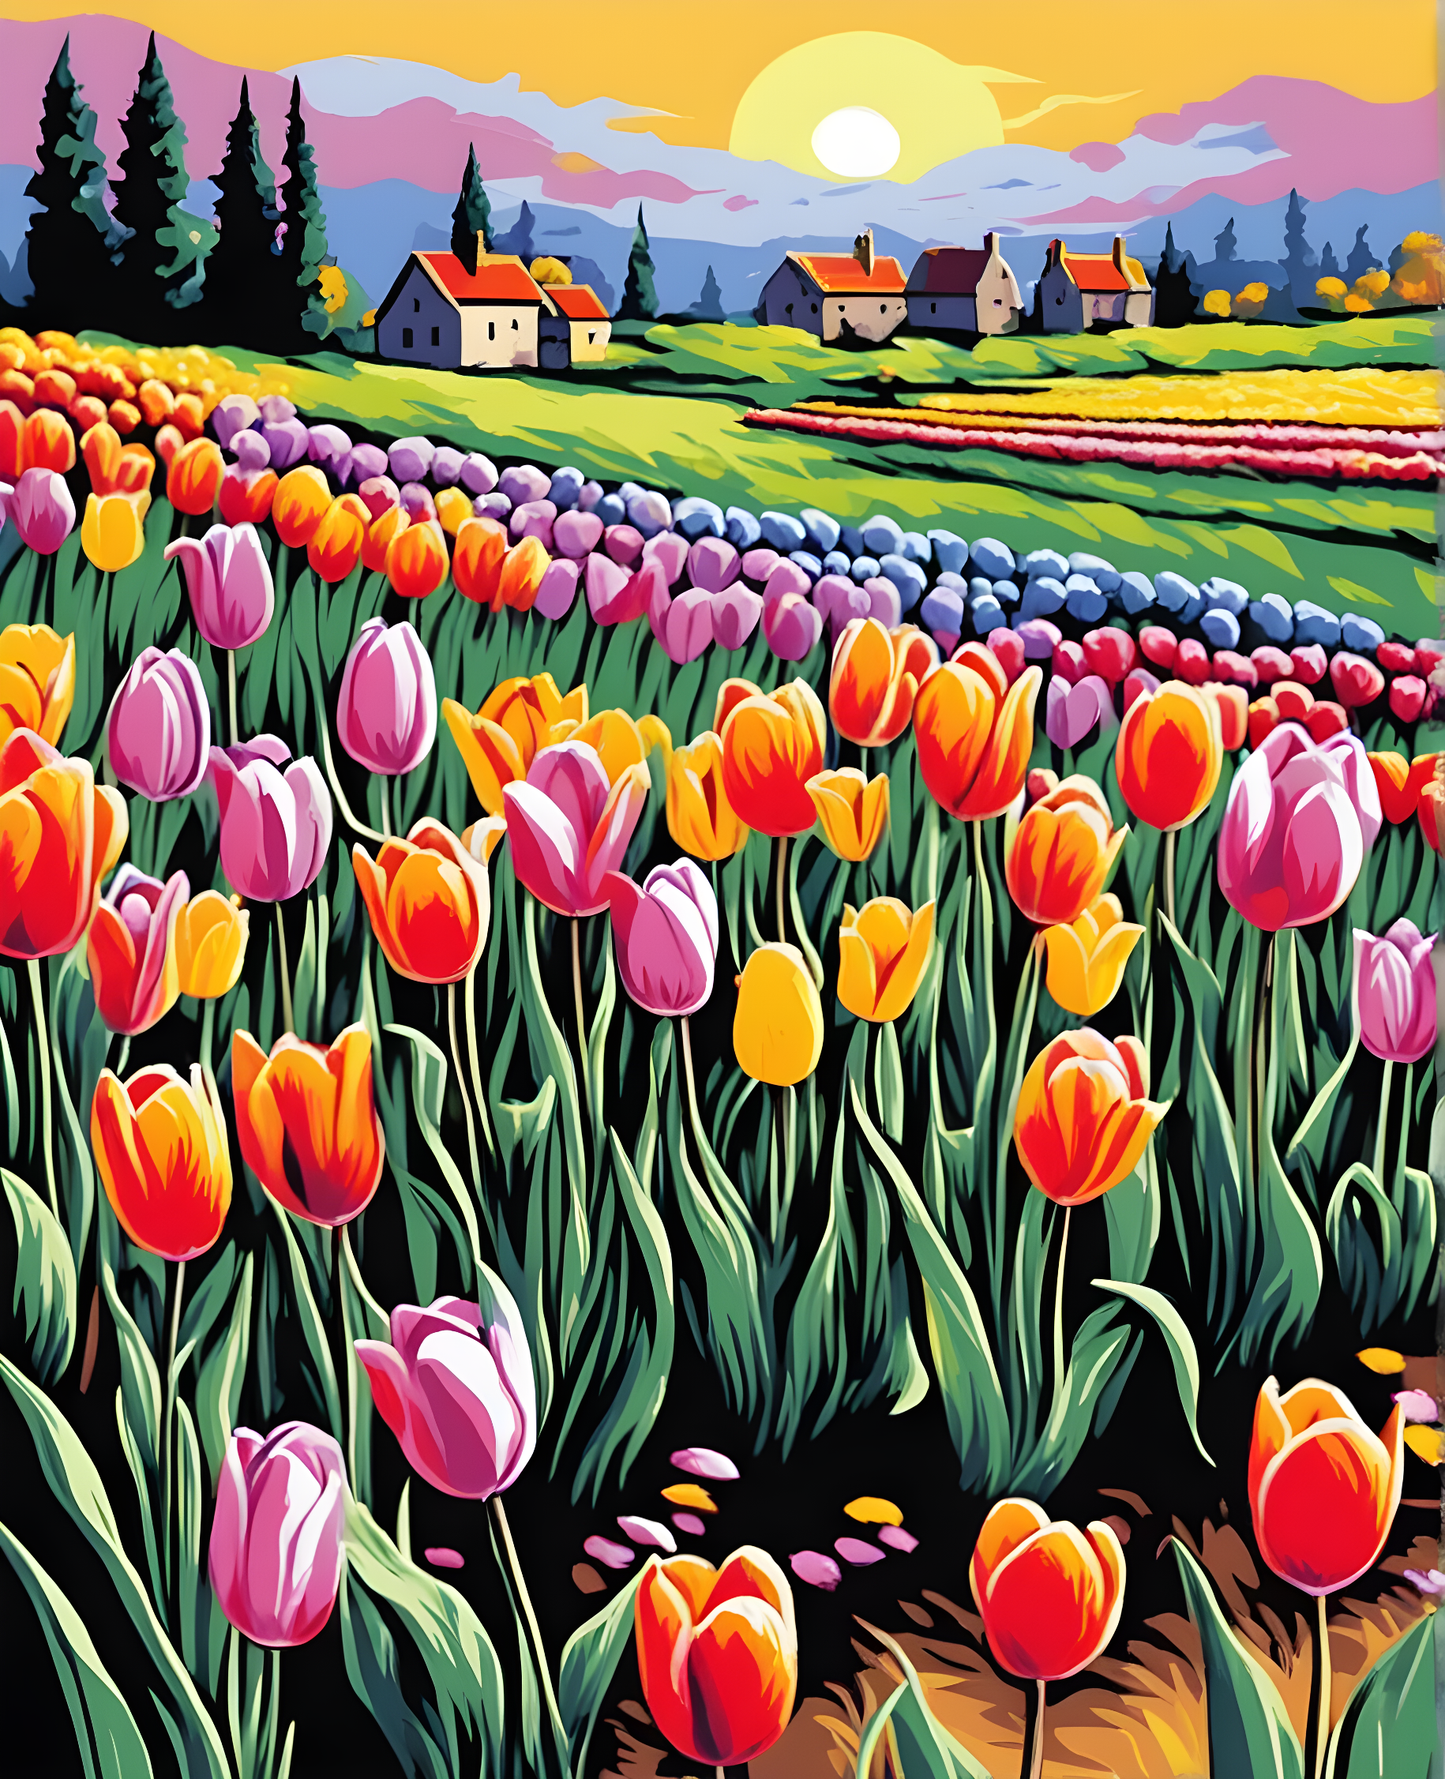 Small Tulips Field on a Sunny Day - Van-Go Paint-By-Number Kit